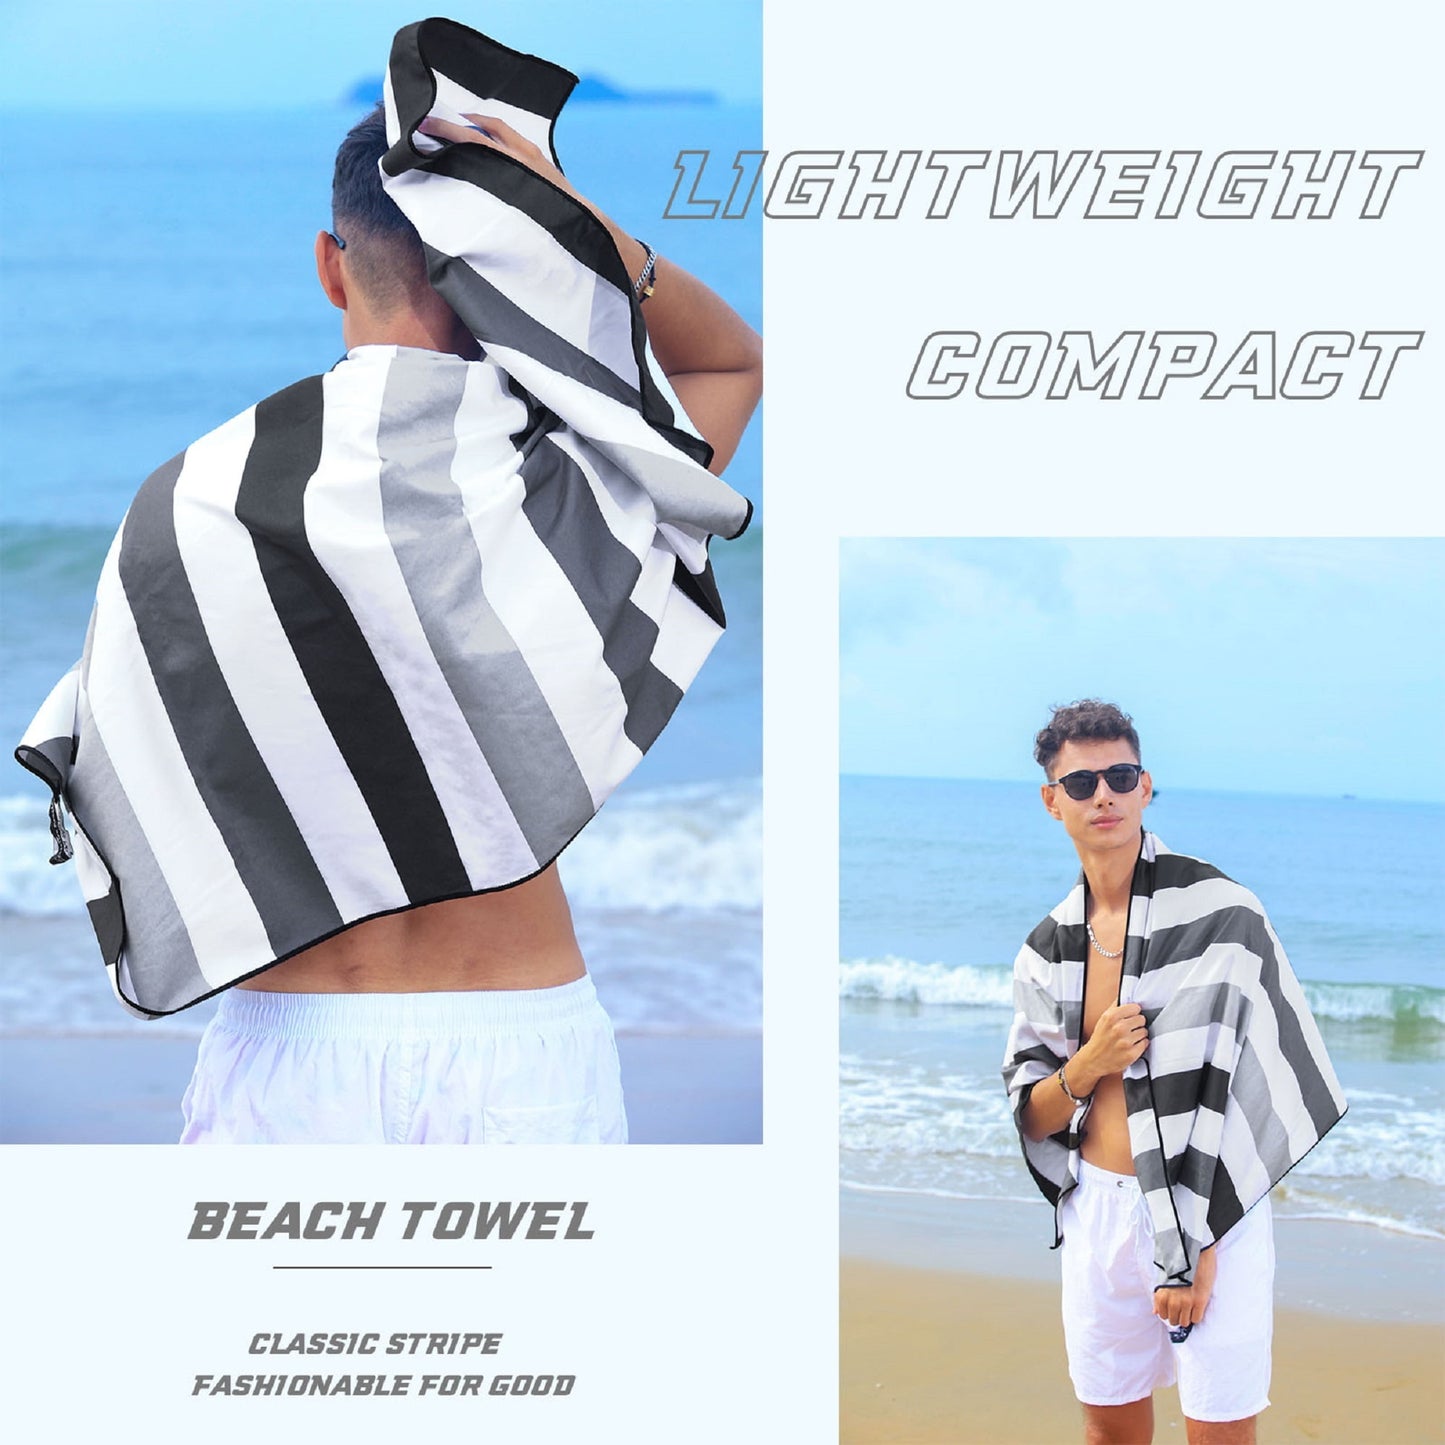 Exclusivo Mezcla Microfiber Quick Dry Beach Towel, Oversized Sand Free Beach Towel for Travel/ Camping/ Sports (Striped Black, 35"X70") - Super Absorbent, Compact and Lightweight